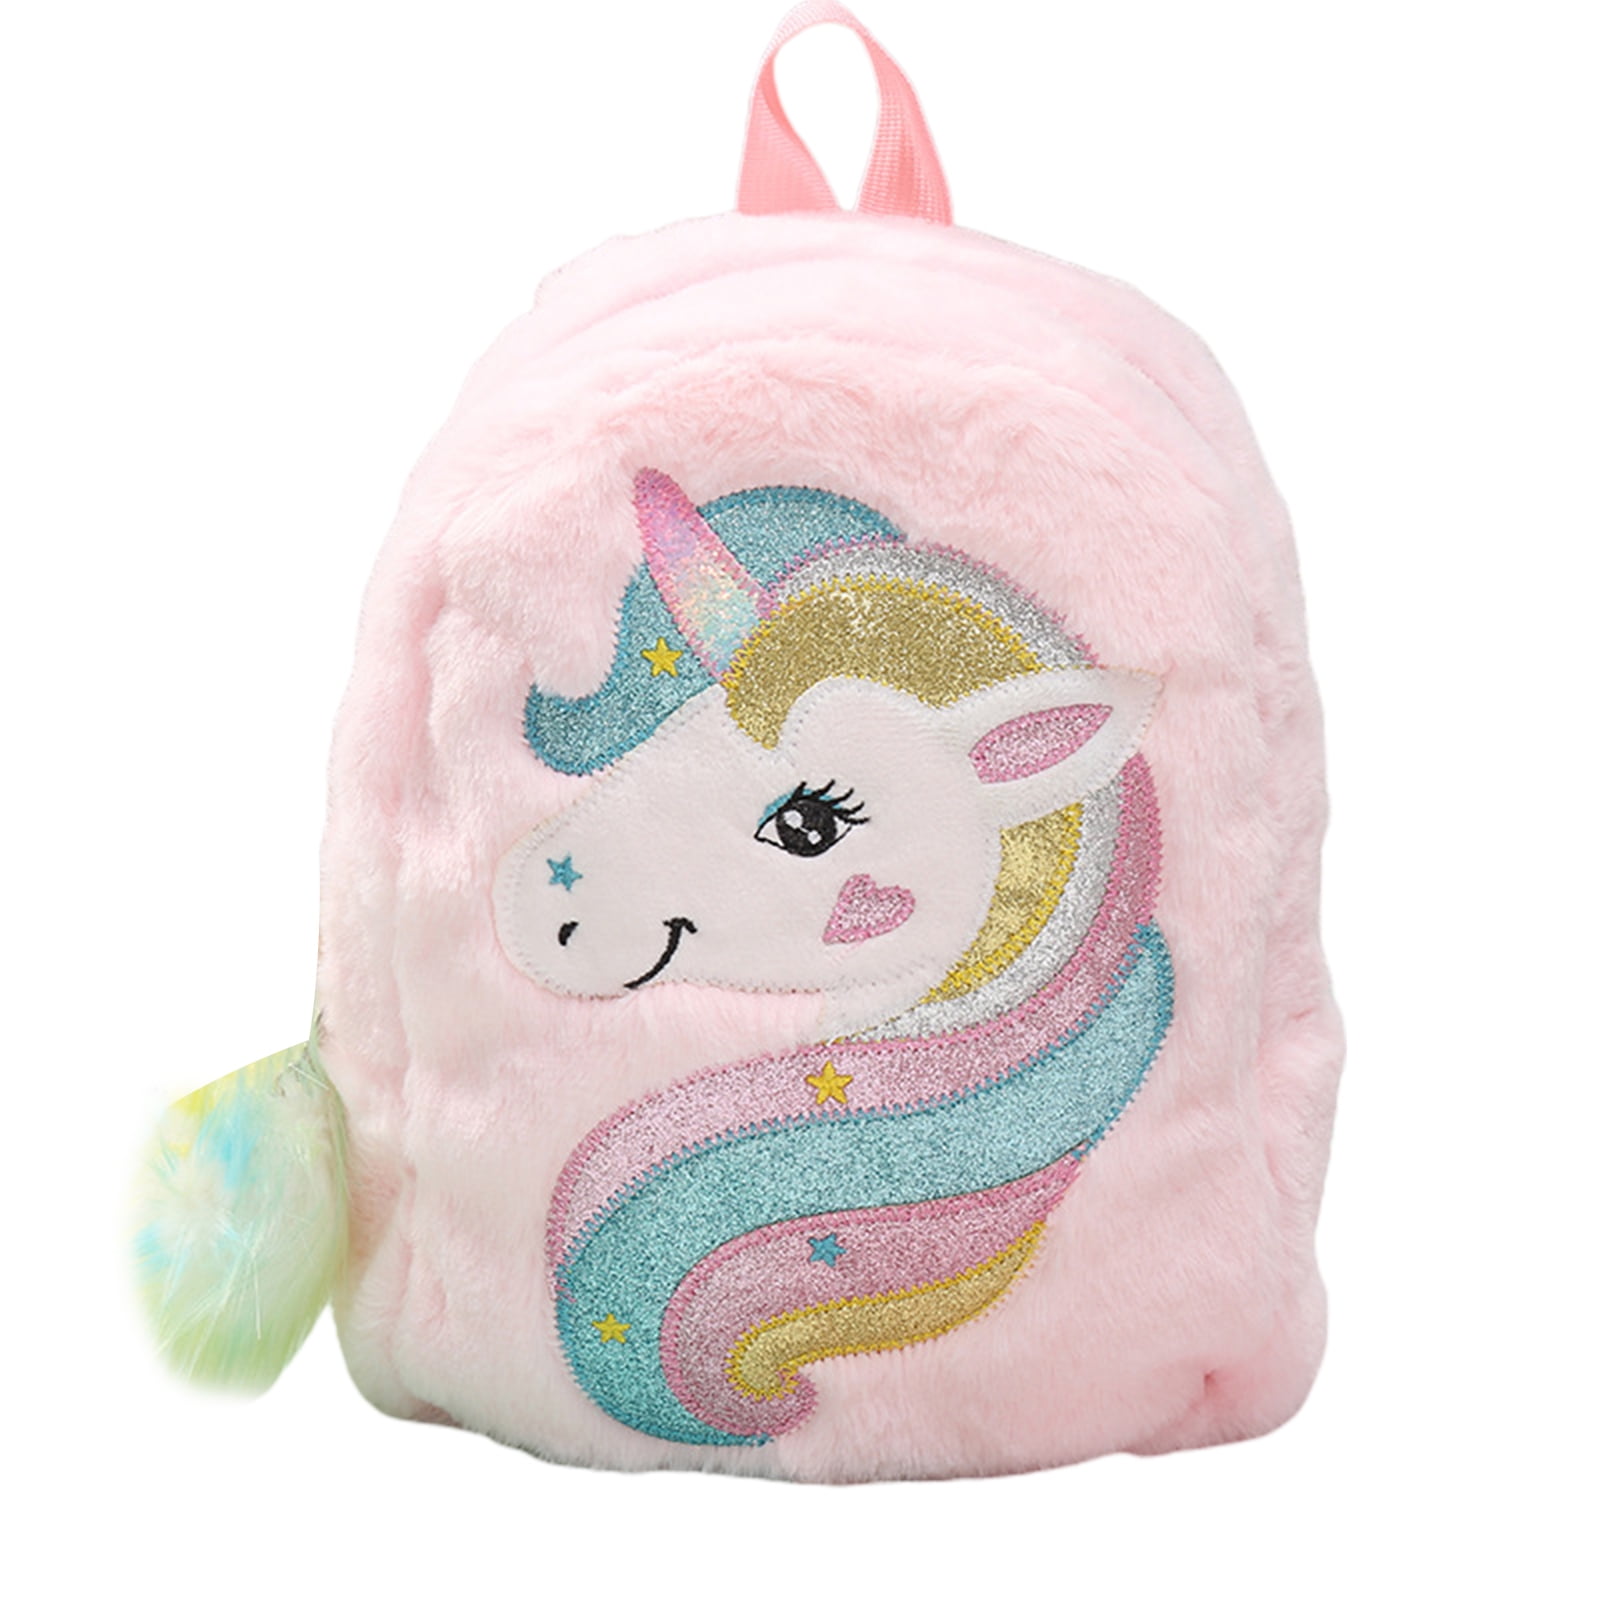 Material: Made of high quality plush. Soft hand feeling, lightweight ...